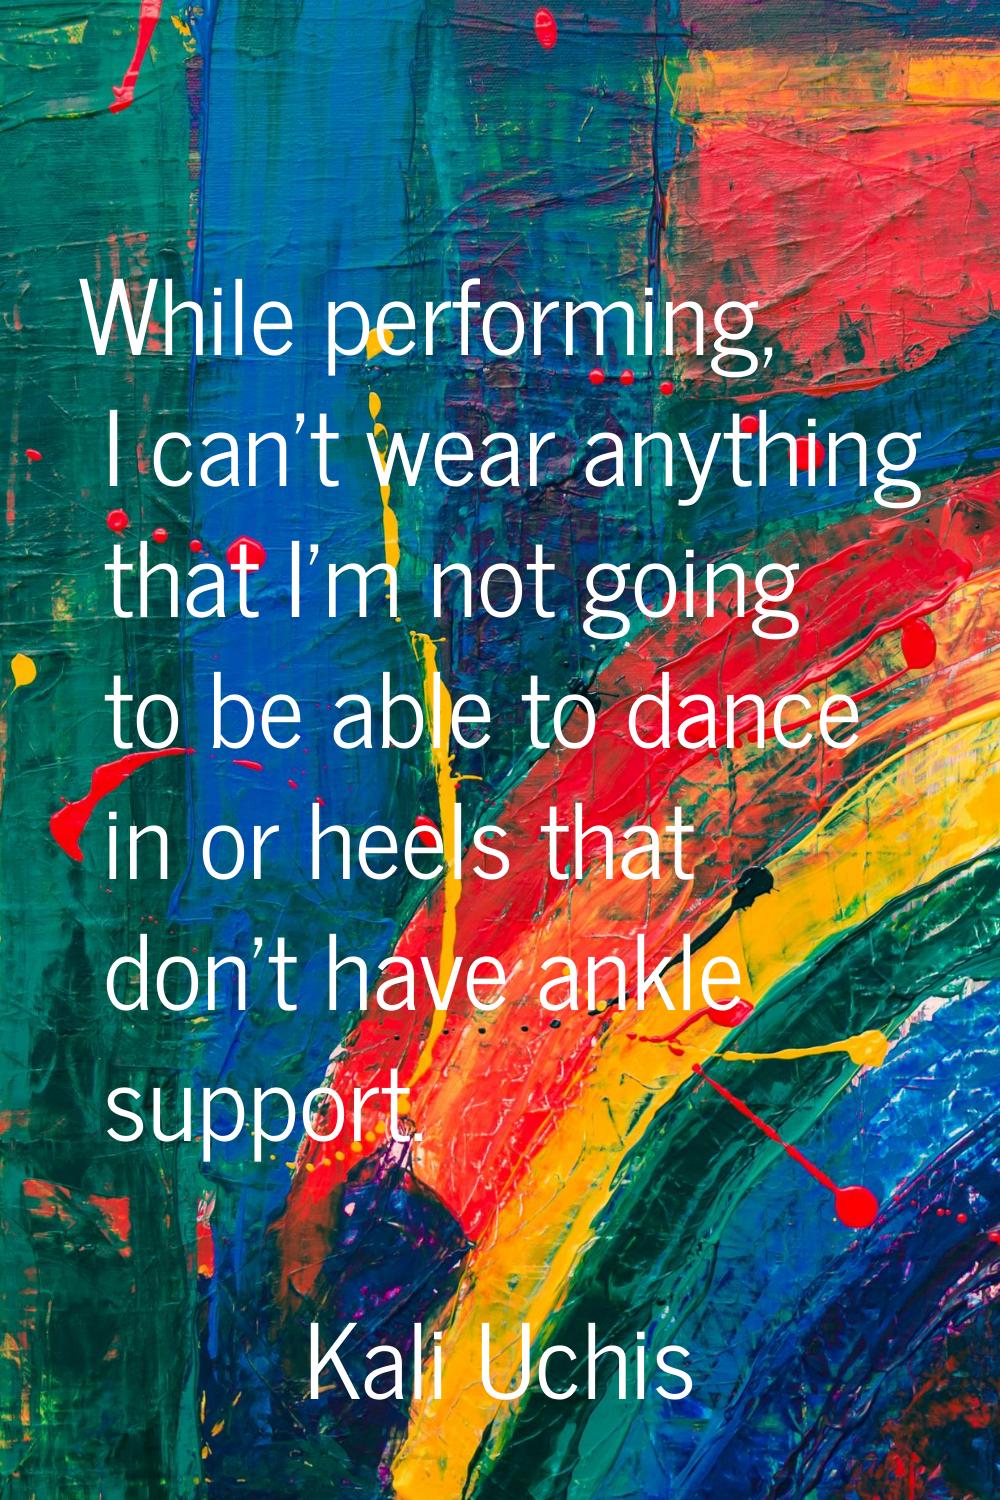 While performing, I can't wear anything that I'm not going to be able to dance in or heels that don